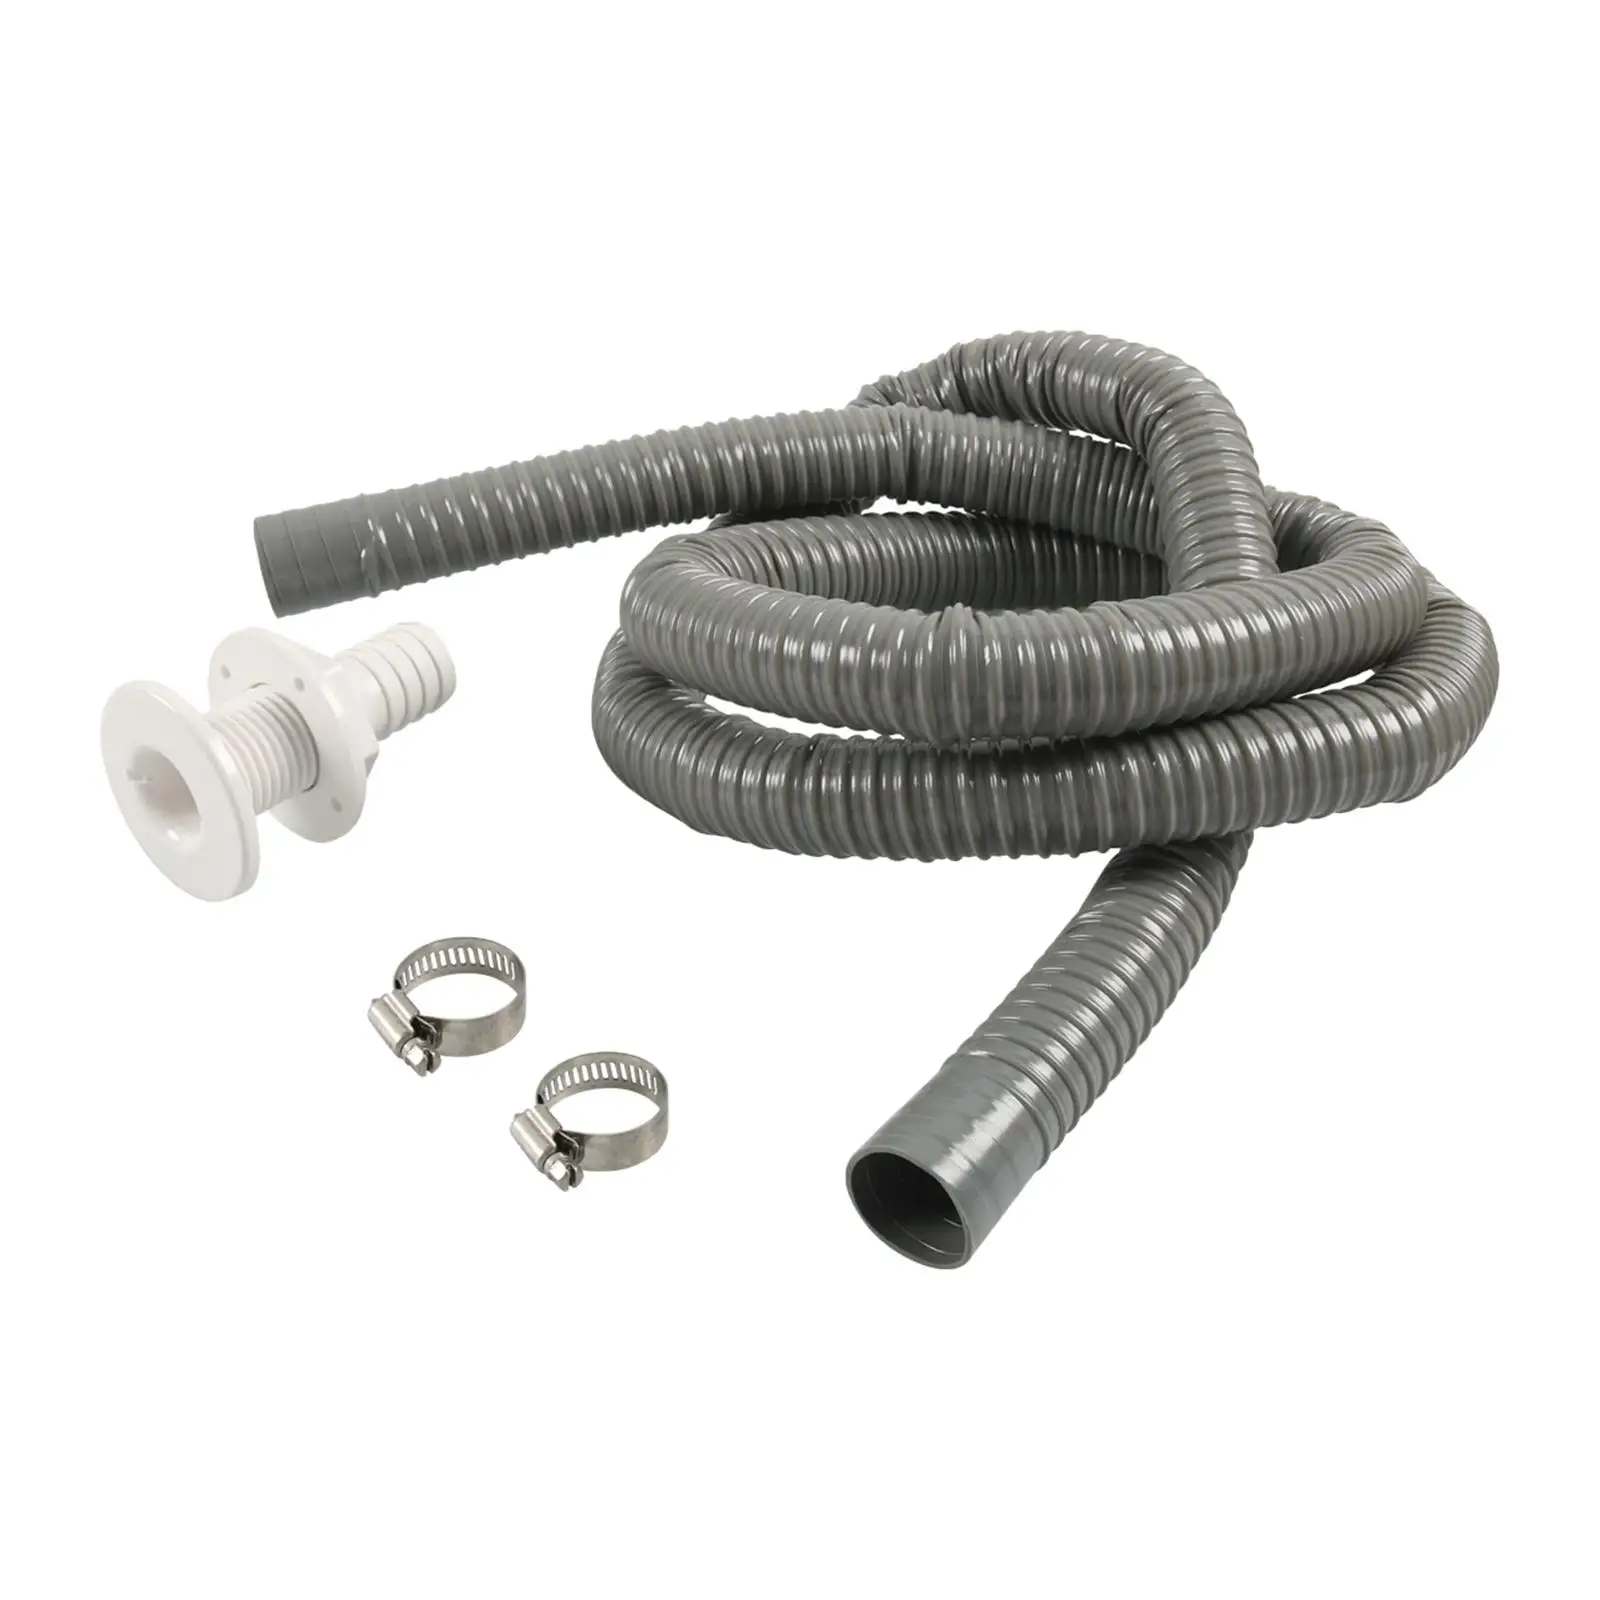 

Marine Hose Bilge Pump Installation with thru Hull & 2 Clamps Kink Free 1-1/2-Inch Dia Plumbing Flexible for Boats